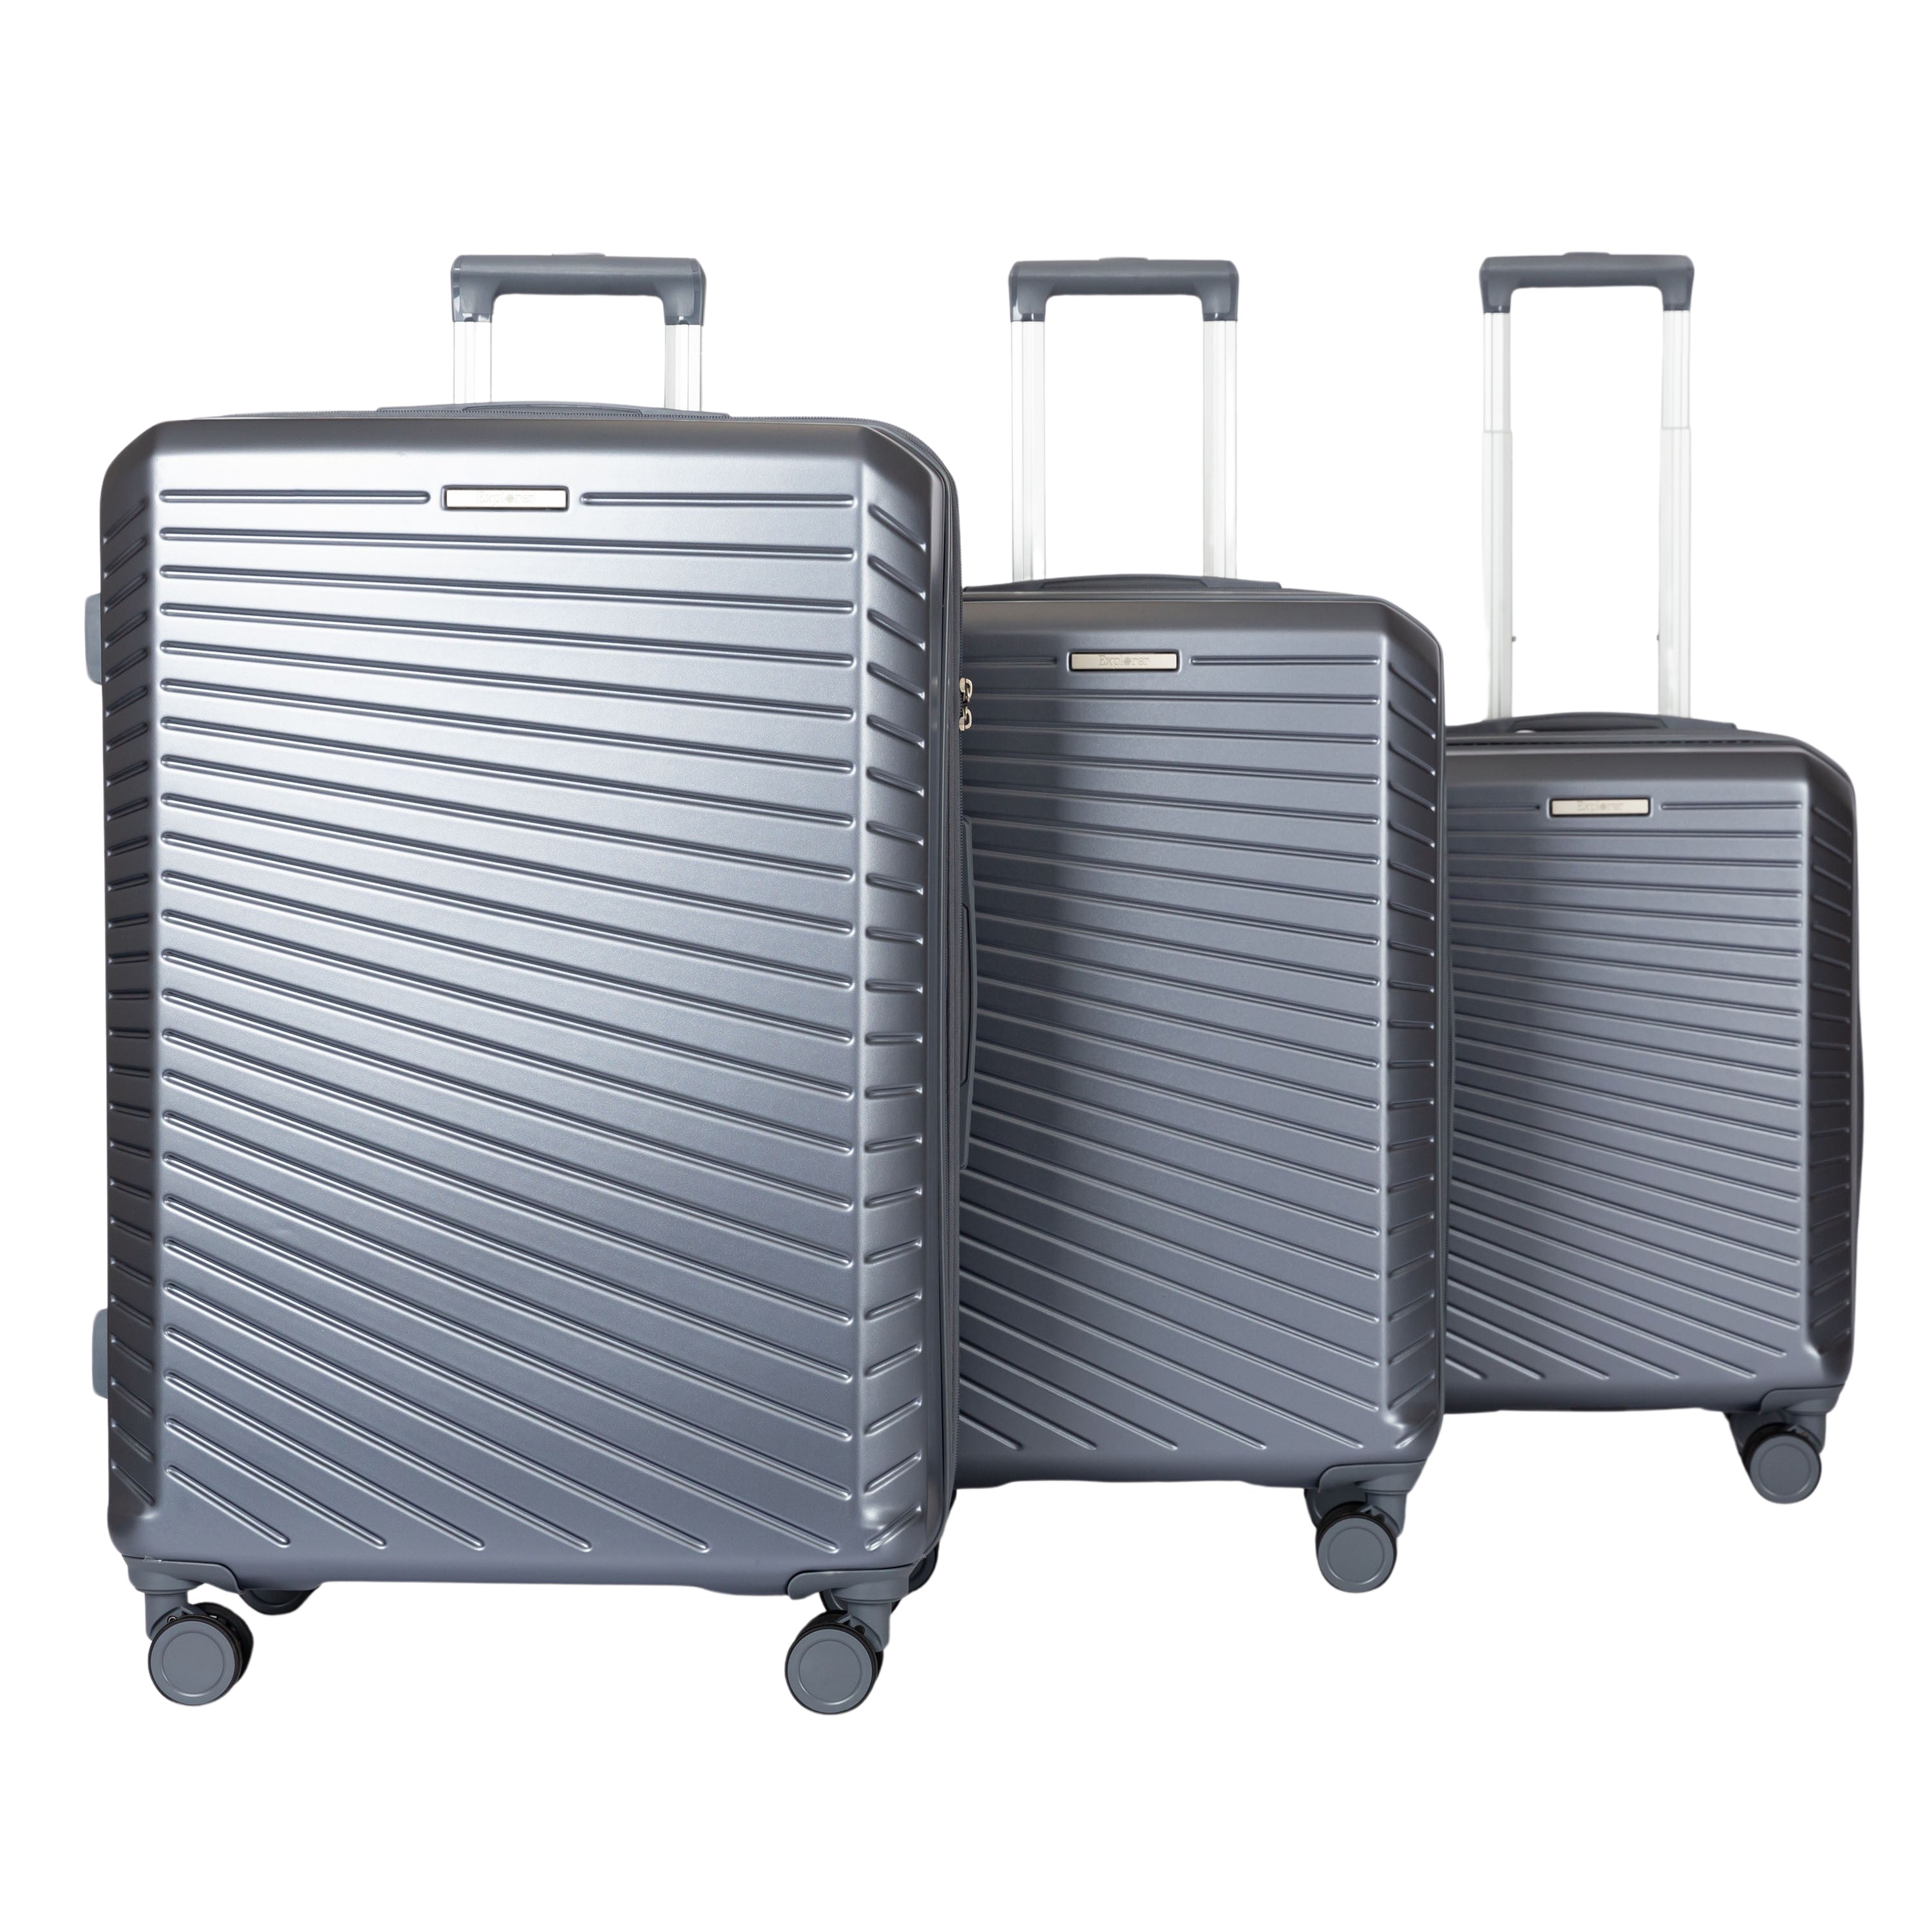 Travel Accessories – Canada Luggage Depot